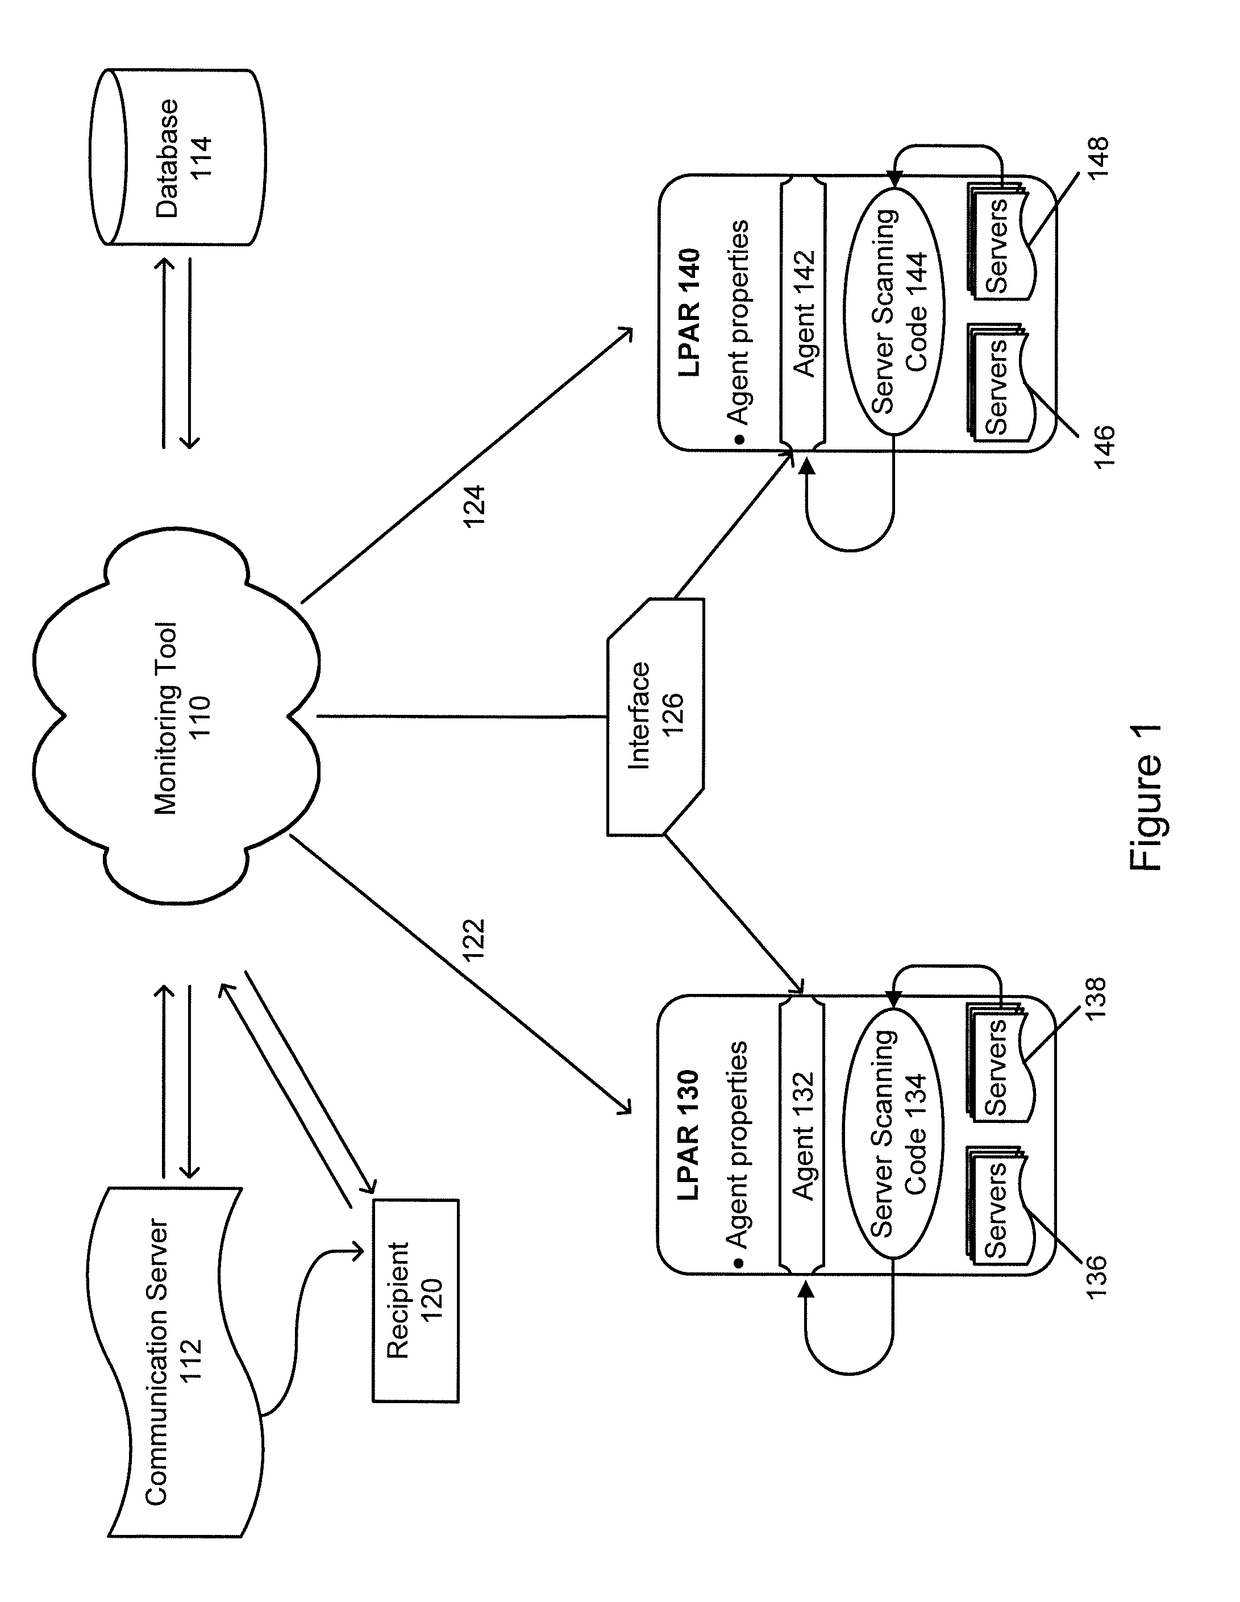 System and method for implementing a server configuration drift monitoring tool